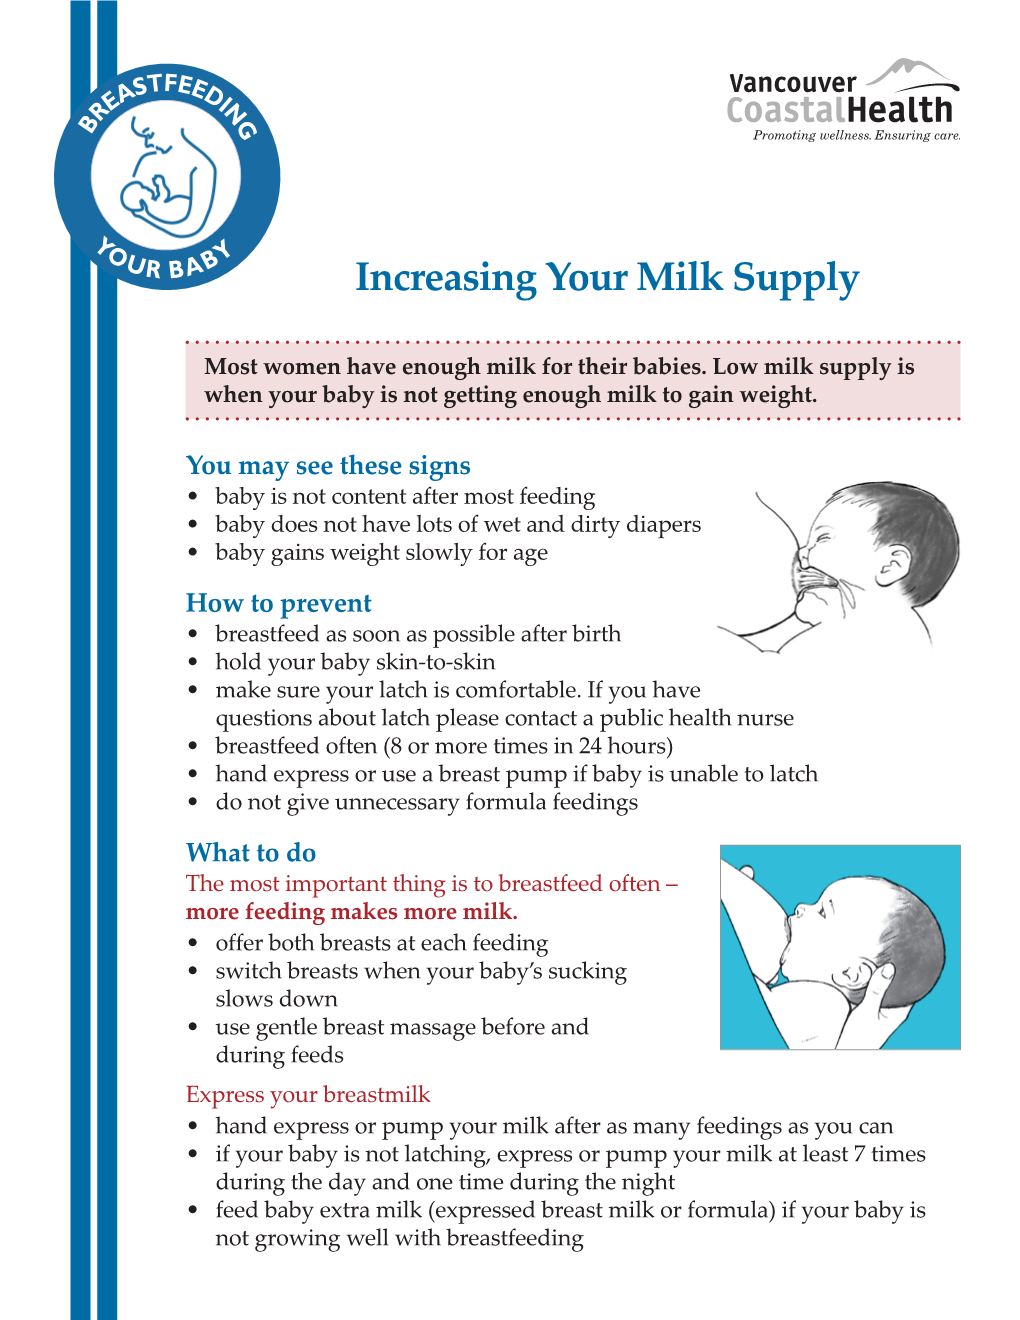 Low Milk Supply Is When Your Baby Is Not Getting Enough Milk to Gain Weight